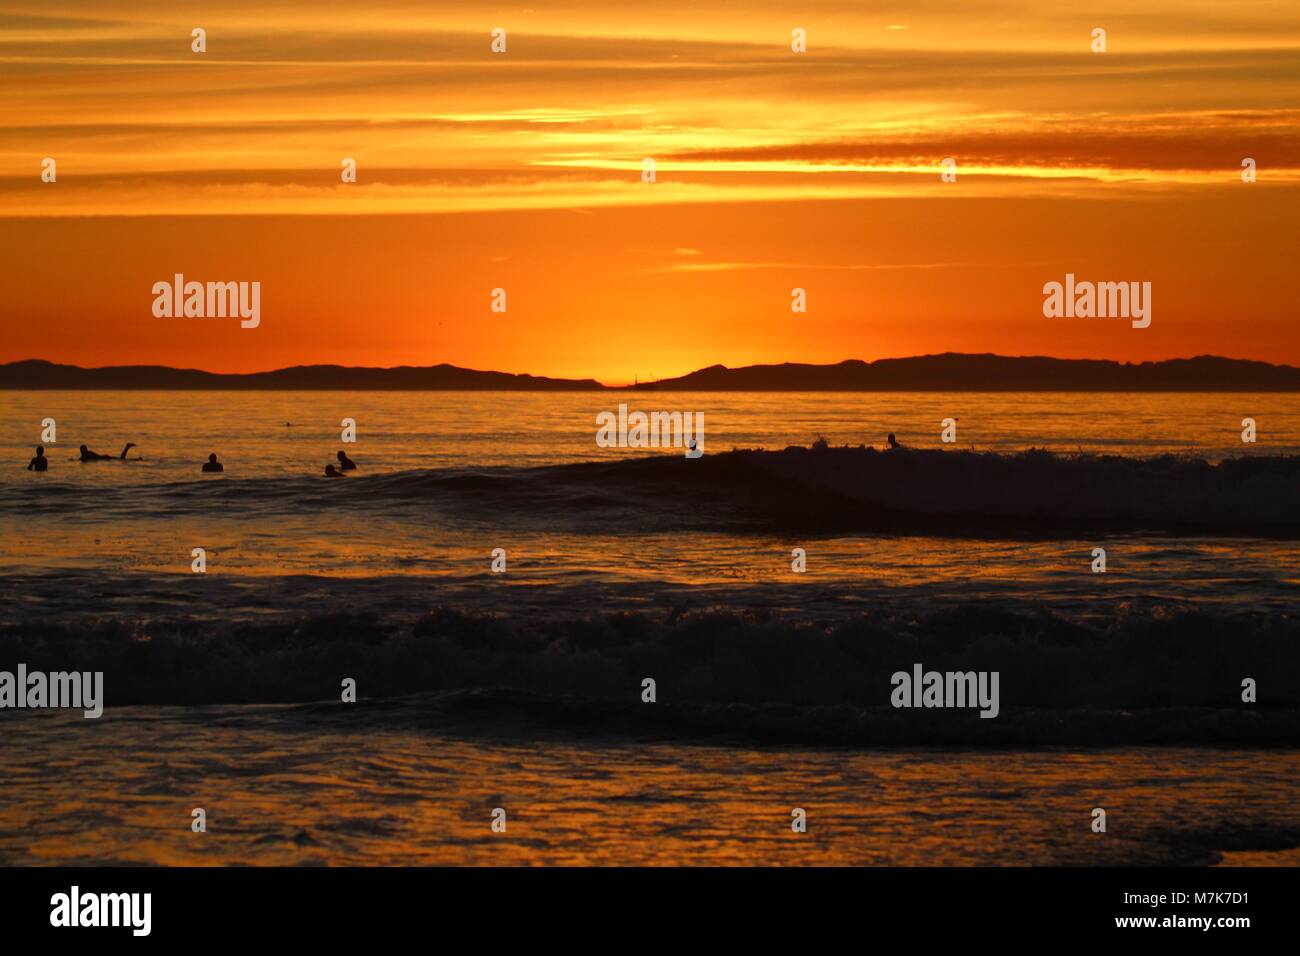 Orange Sunset with silhouettes of surfers Stock Photo